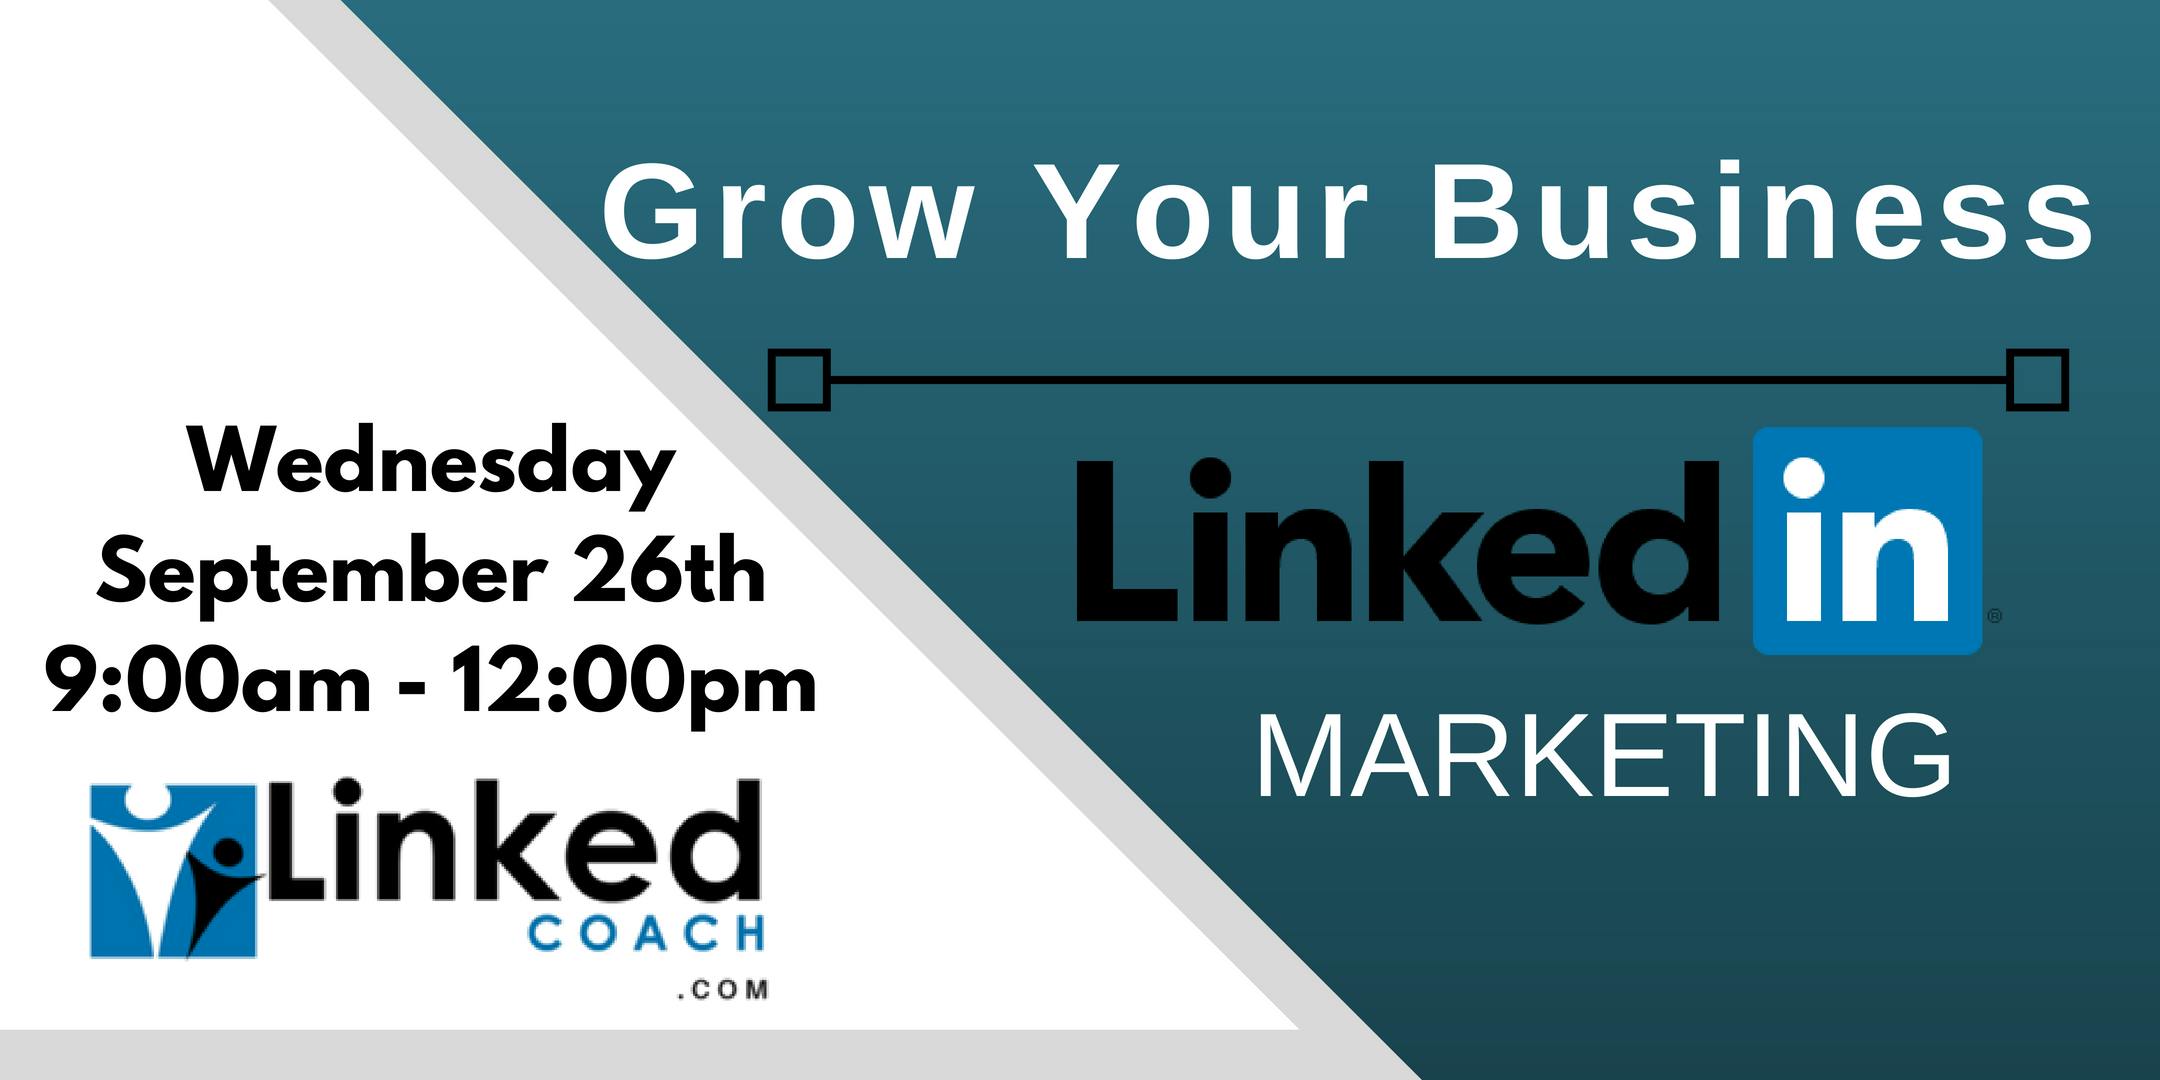 Grow Your Business With LinkedIn Marketing 